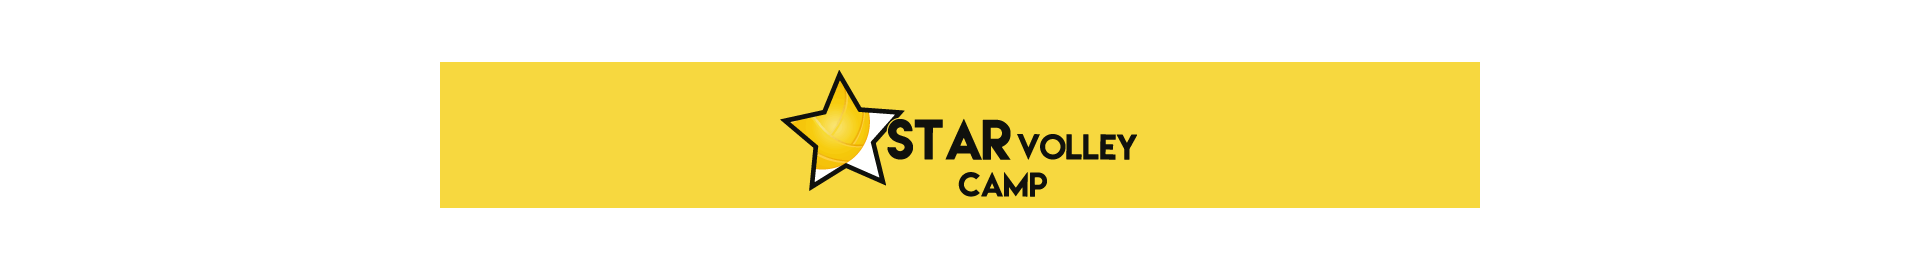 Star Volley Camp